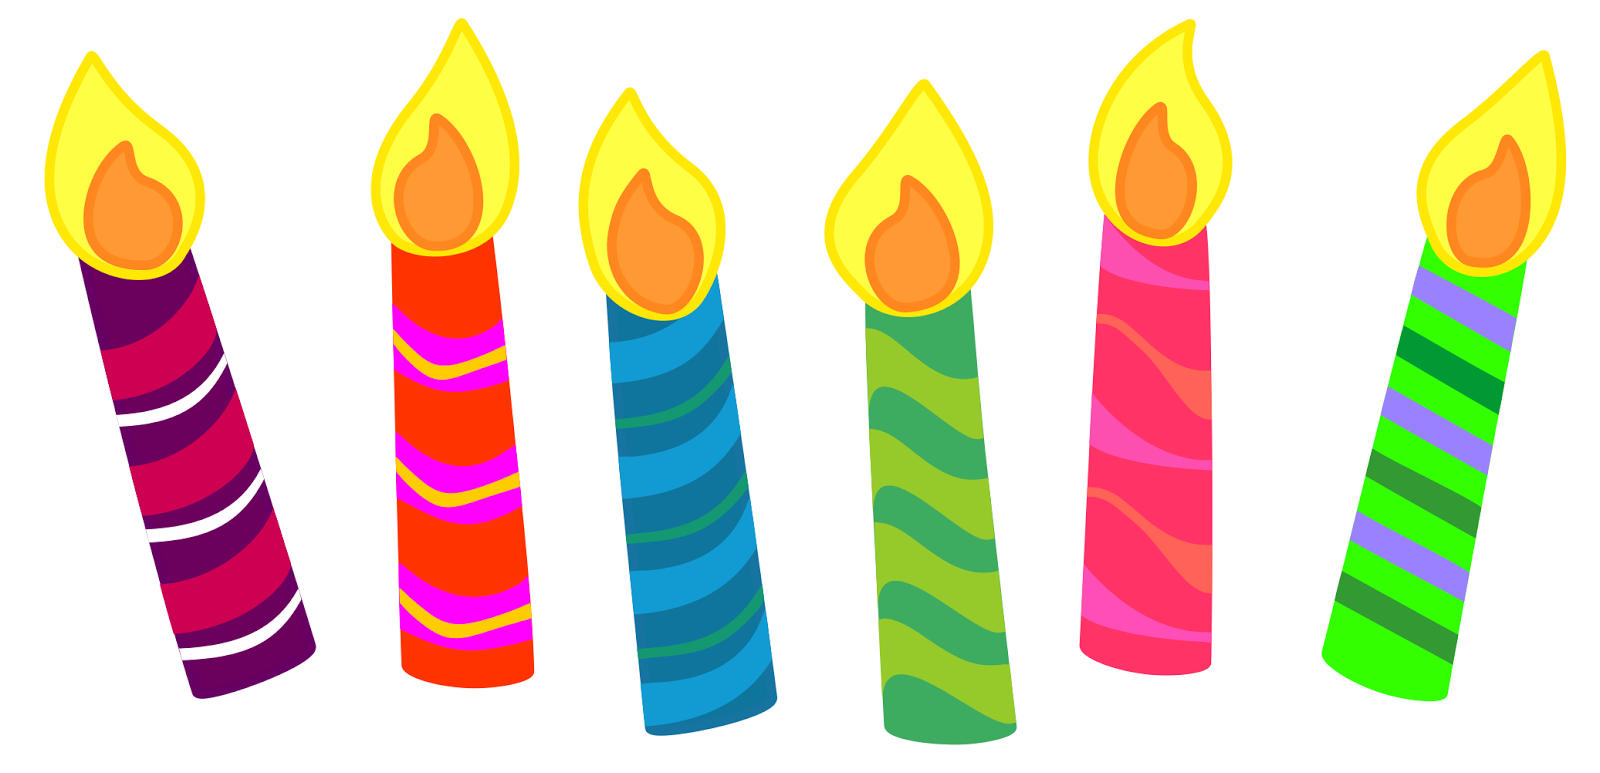 Candles clipart free large images